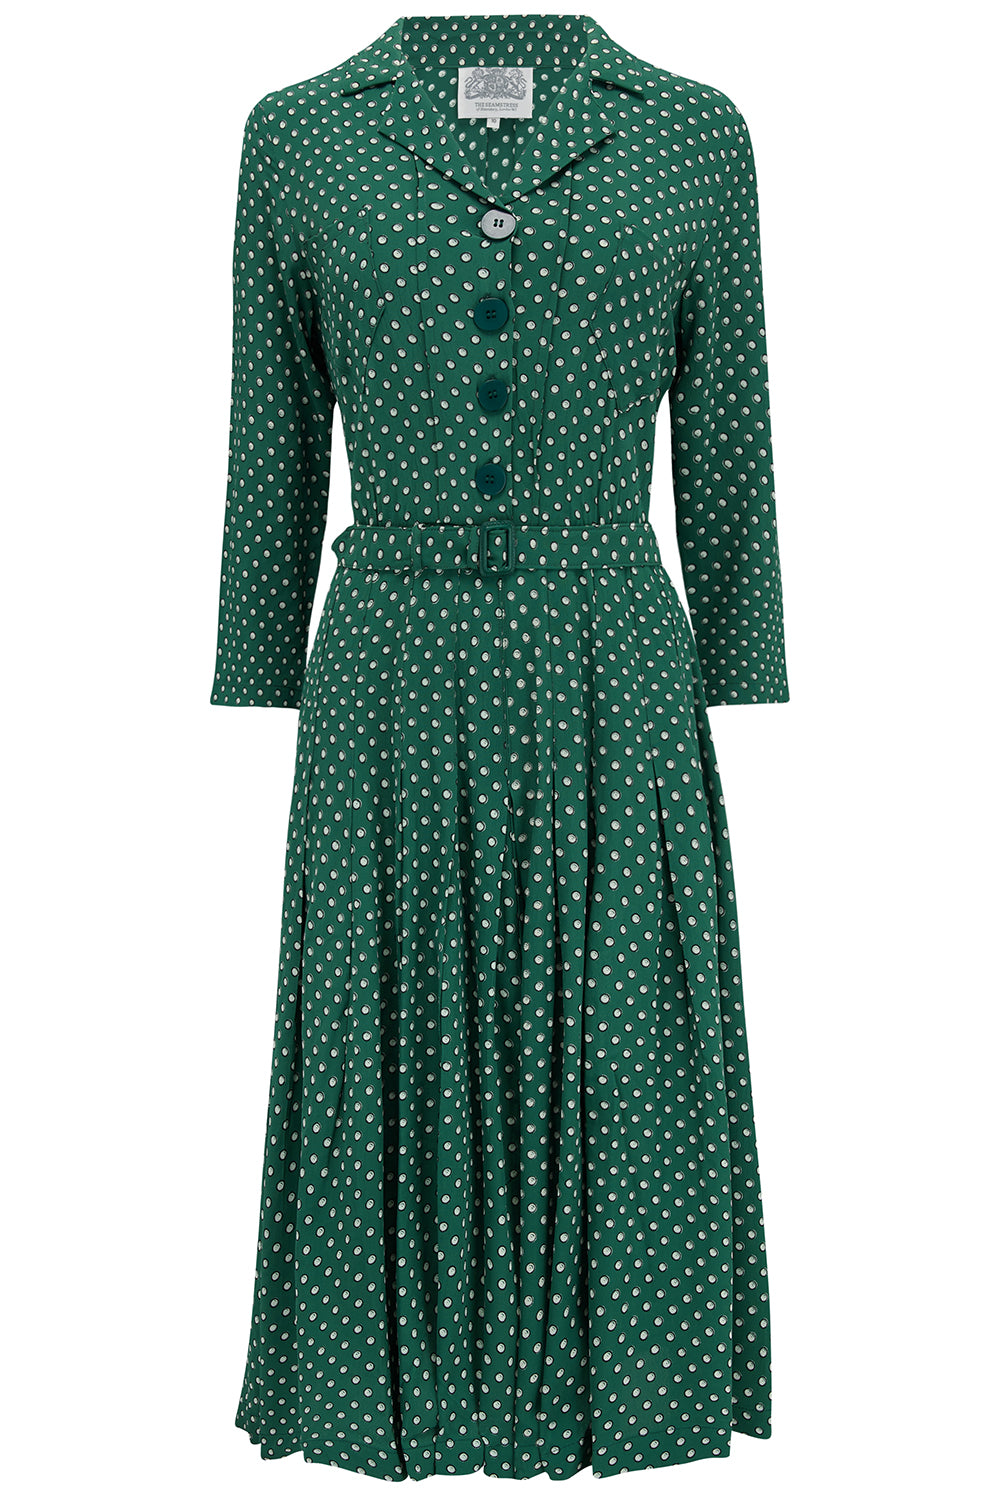 Lucille shirt dress CC41 in Green Ditzy Print , Classic 1940s True Vintage Style - True and authentic vintage style clothing, inspired by the Classic styles of CC41 , WW2 and the fun 1950s RocknRoll era, for everyday wear plus events like Goodwood Revival, Twinwood Festival and Viva Las Vegas Rockabilly Weekend Rock n Romance The Seamstress of Bloomsbury